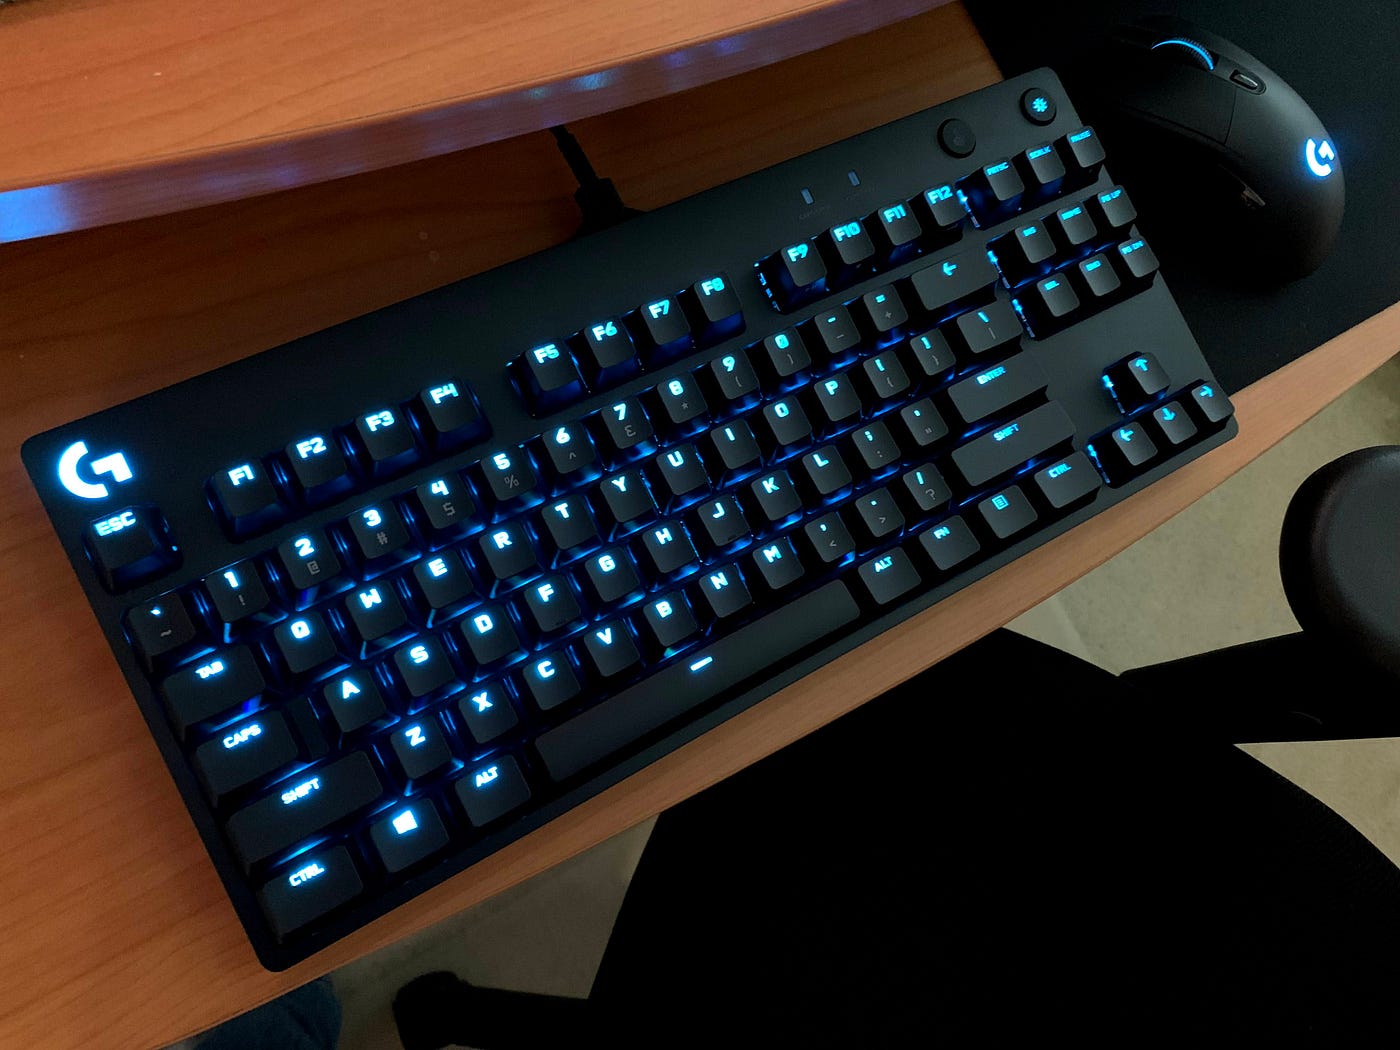 Logitech G Pro X Keyboard review: Hot-swappable switches let you